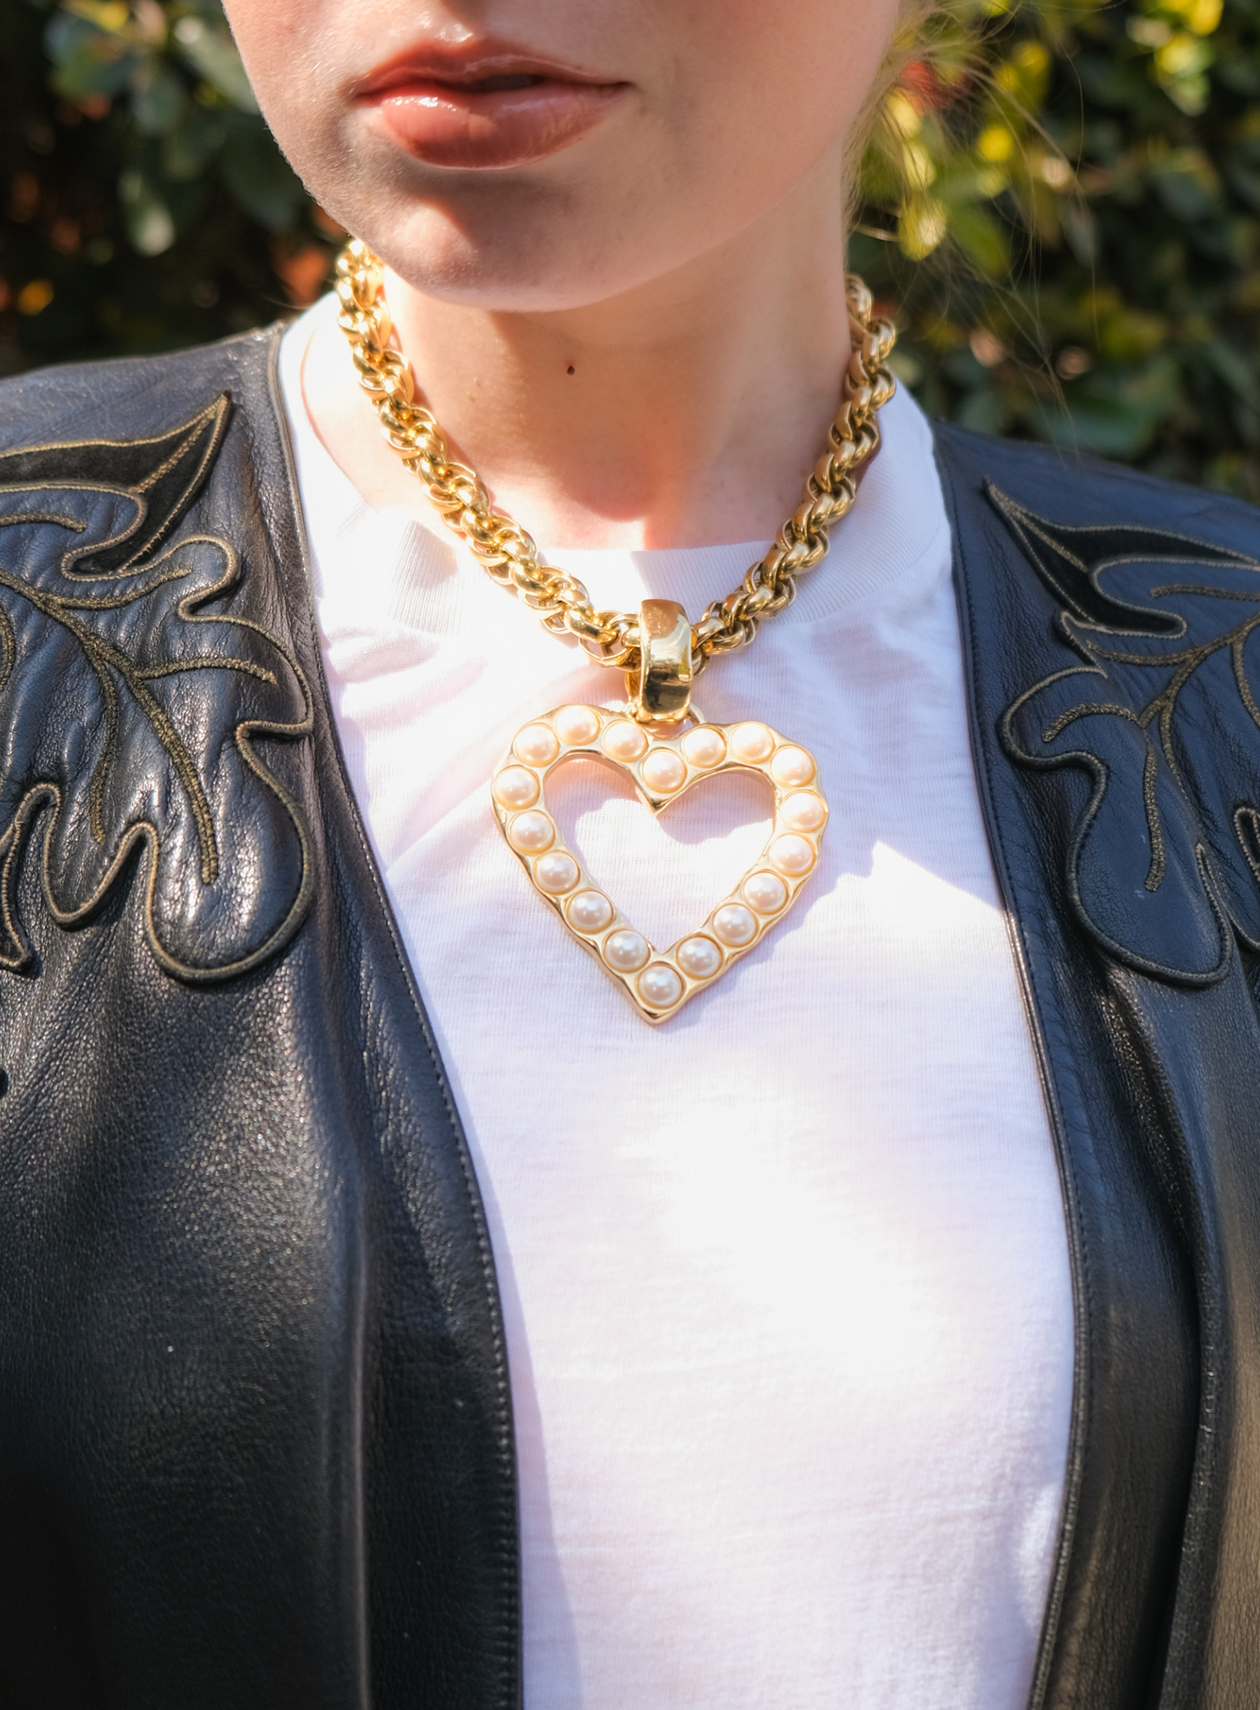 Givenchy Faux Pearl Heart Pendant Necklace